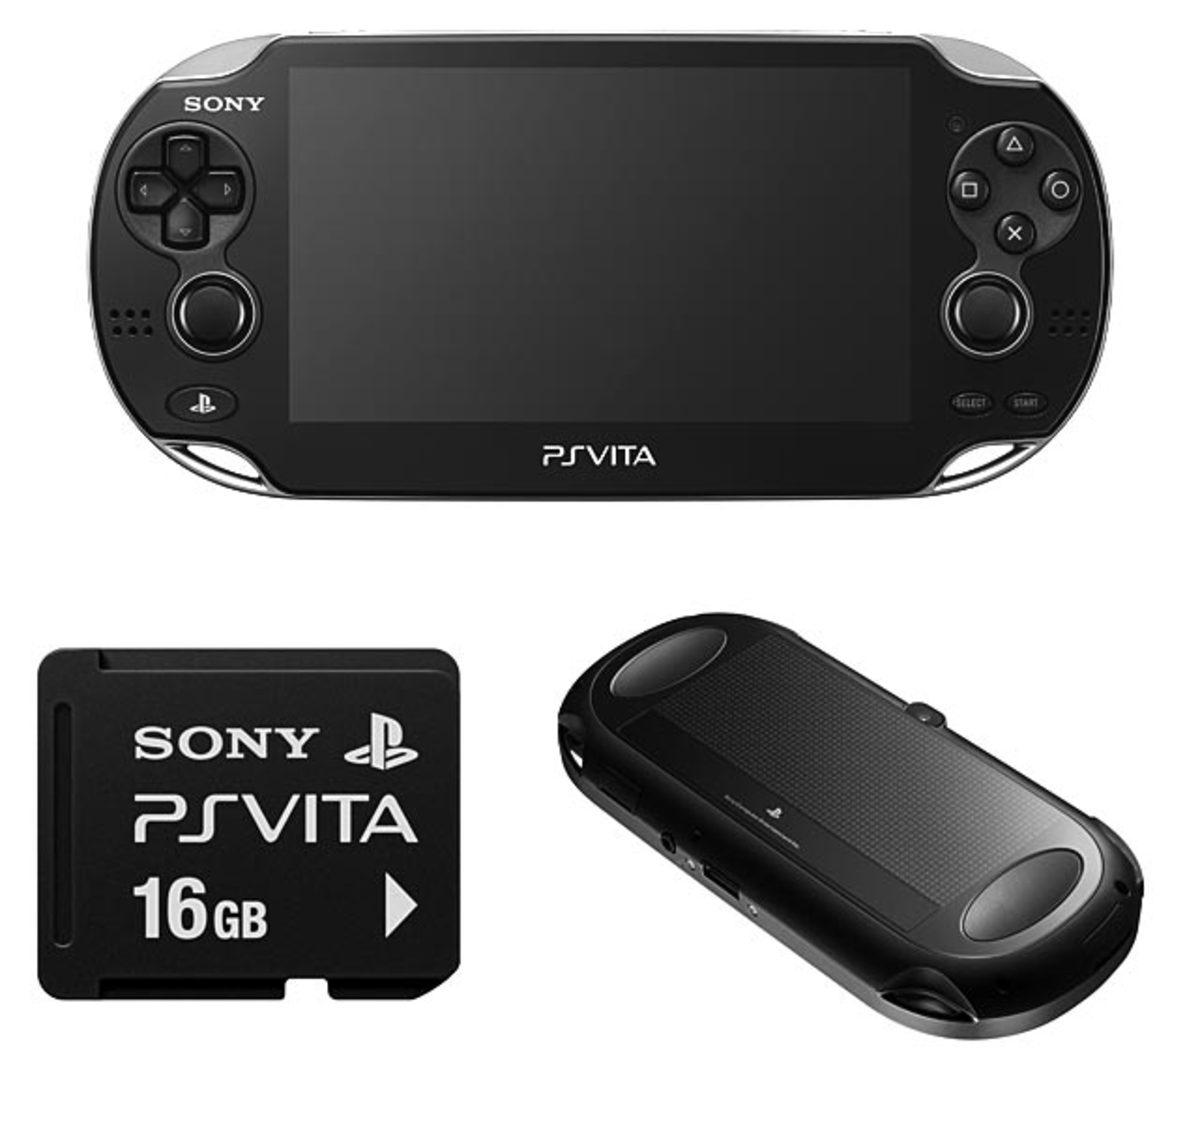 Pre-Owned Authentic PlayStation Ps Vita 2000 Console WiFi - White - (Like  New) 